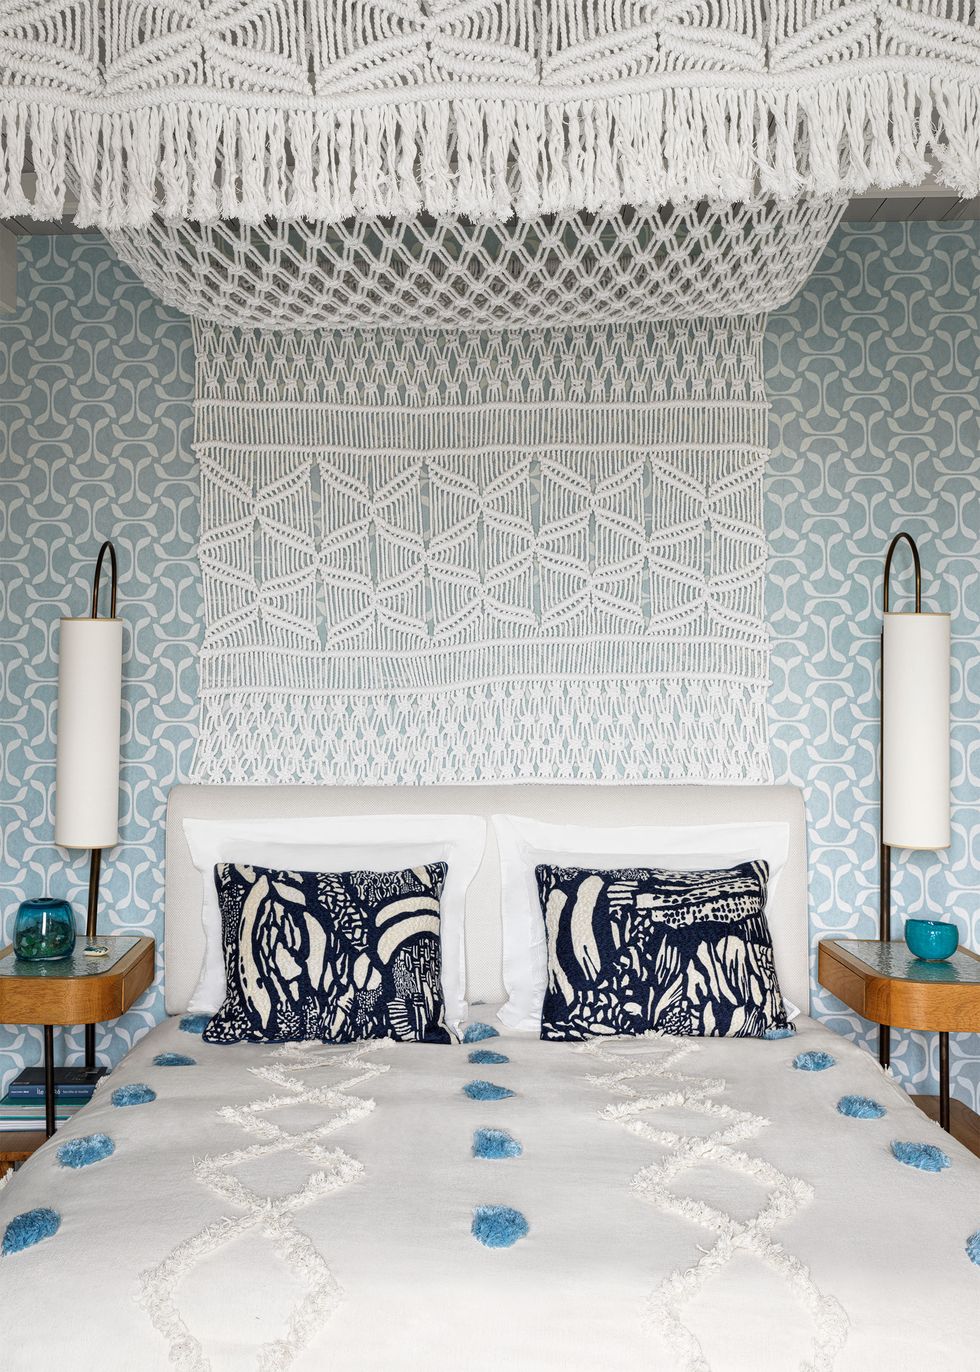 Bed with upholstered headboard and decorative pillows, white bedspread with blue pom-poms, nightstands with lamps on each side, crocheted bed canopy, wallpaper with a muted blue and white pattern